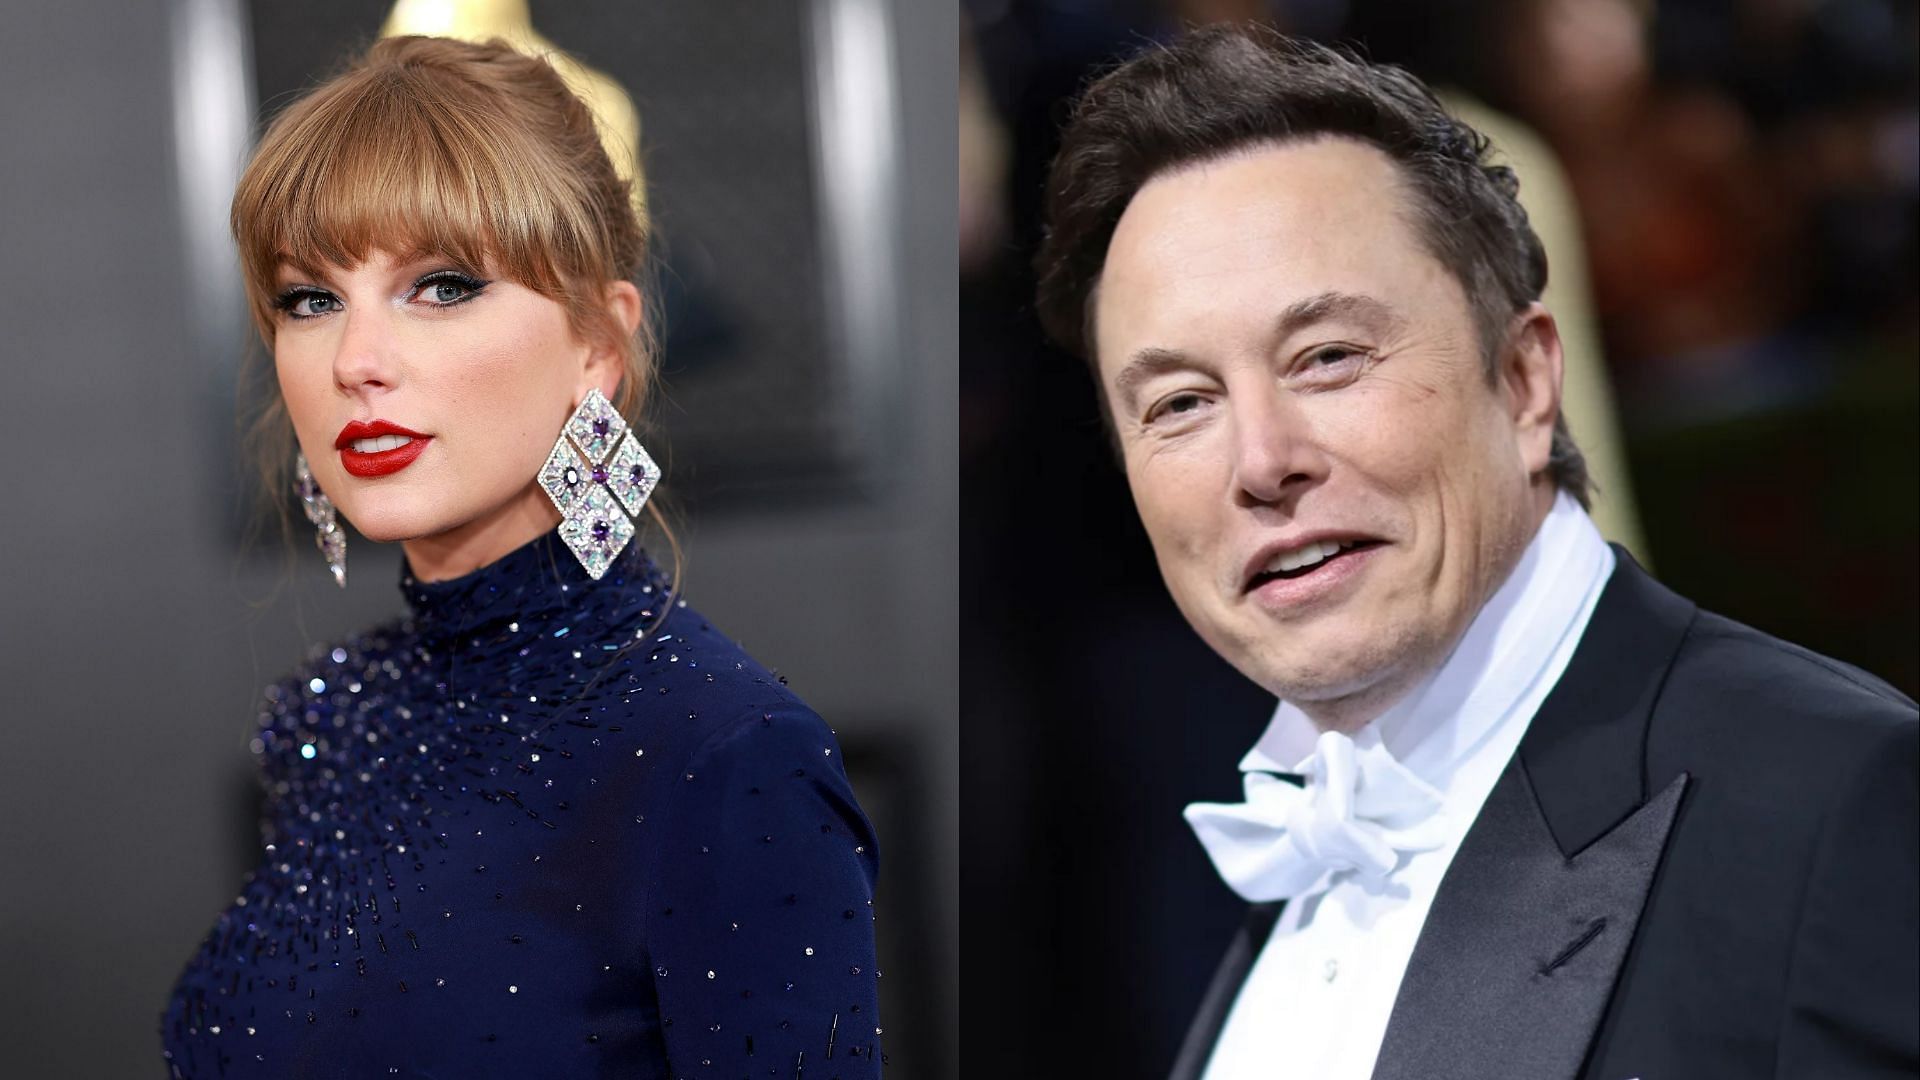 Elon Musk comments on Taylor Swift